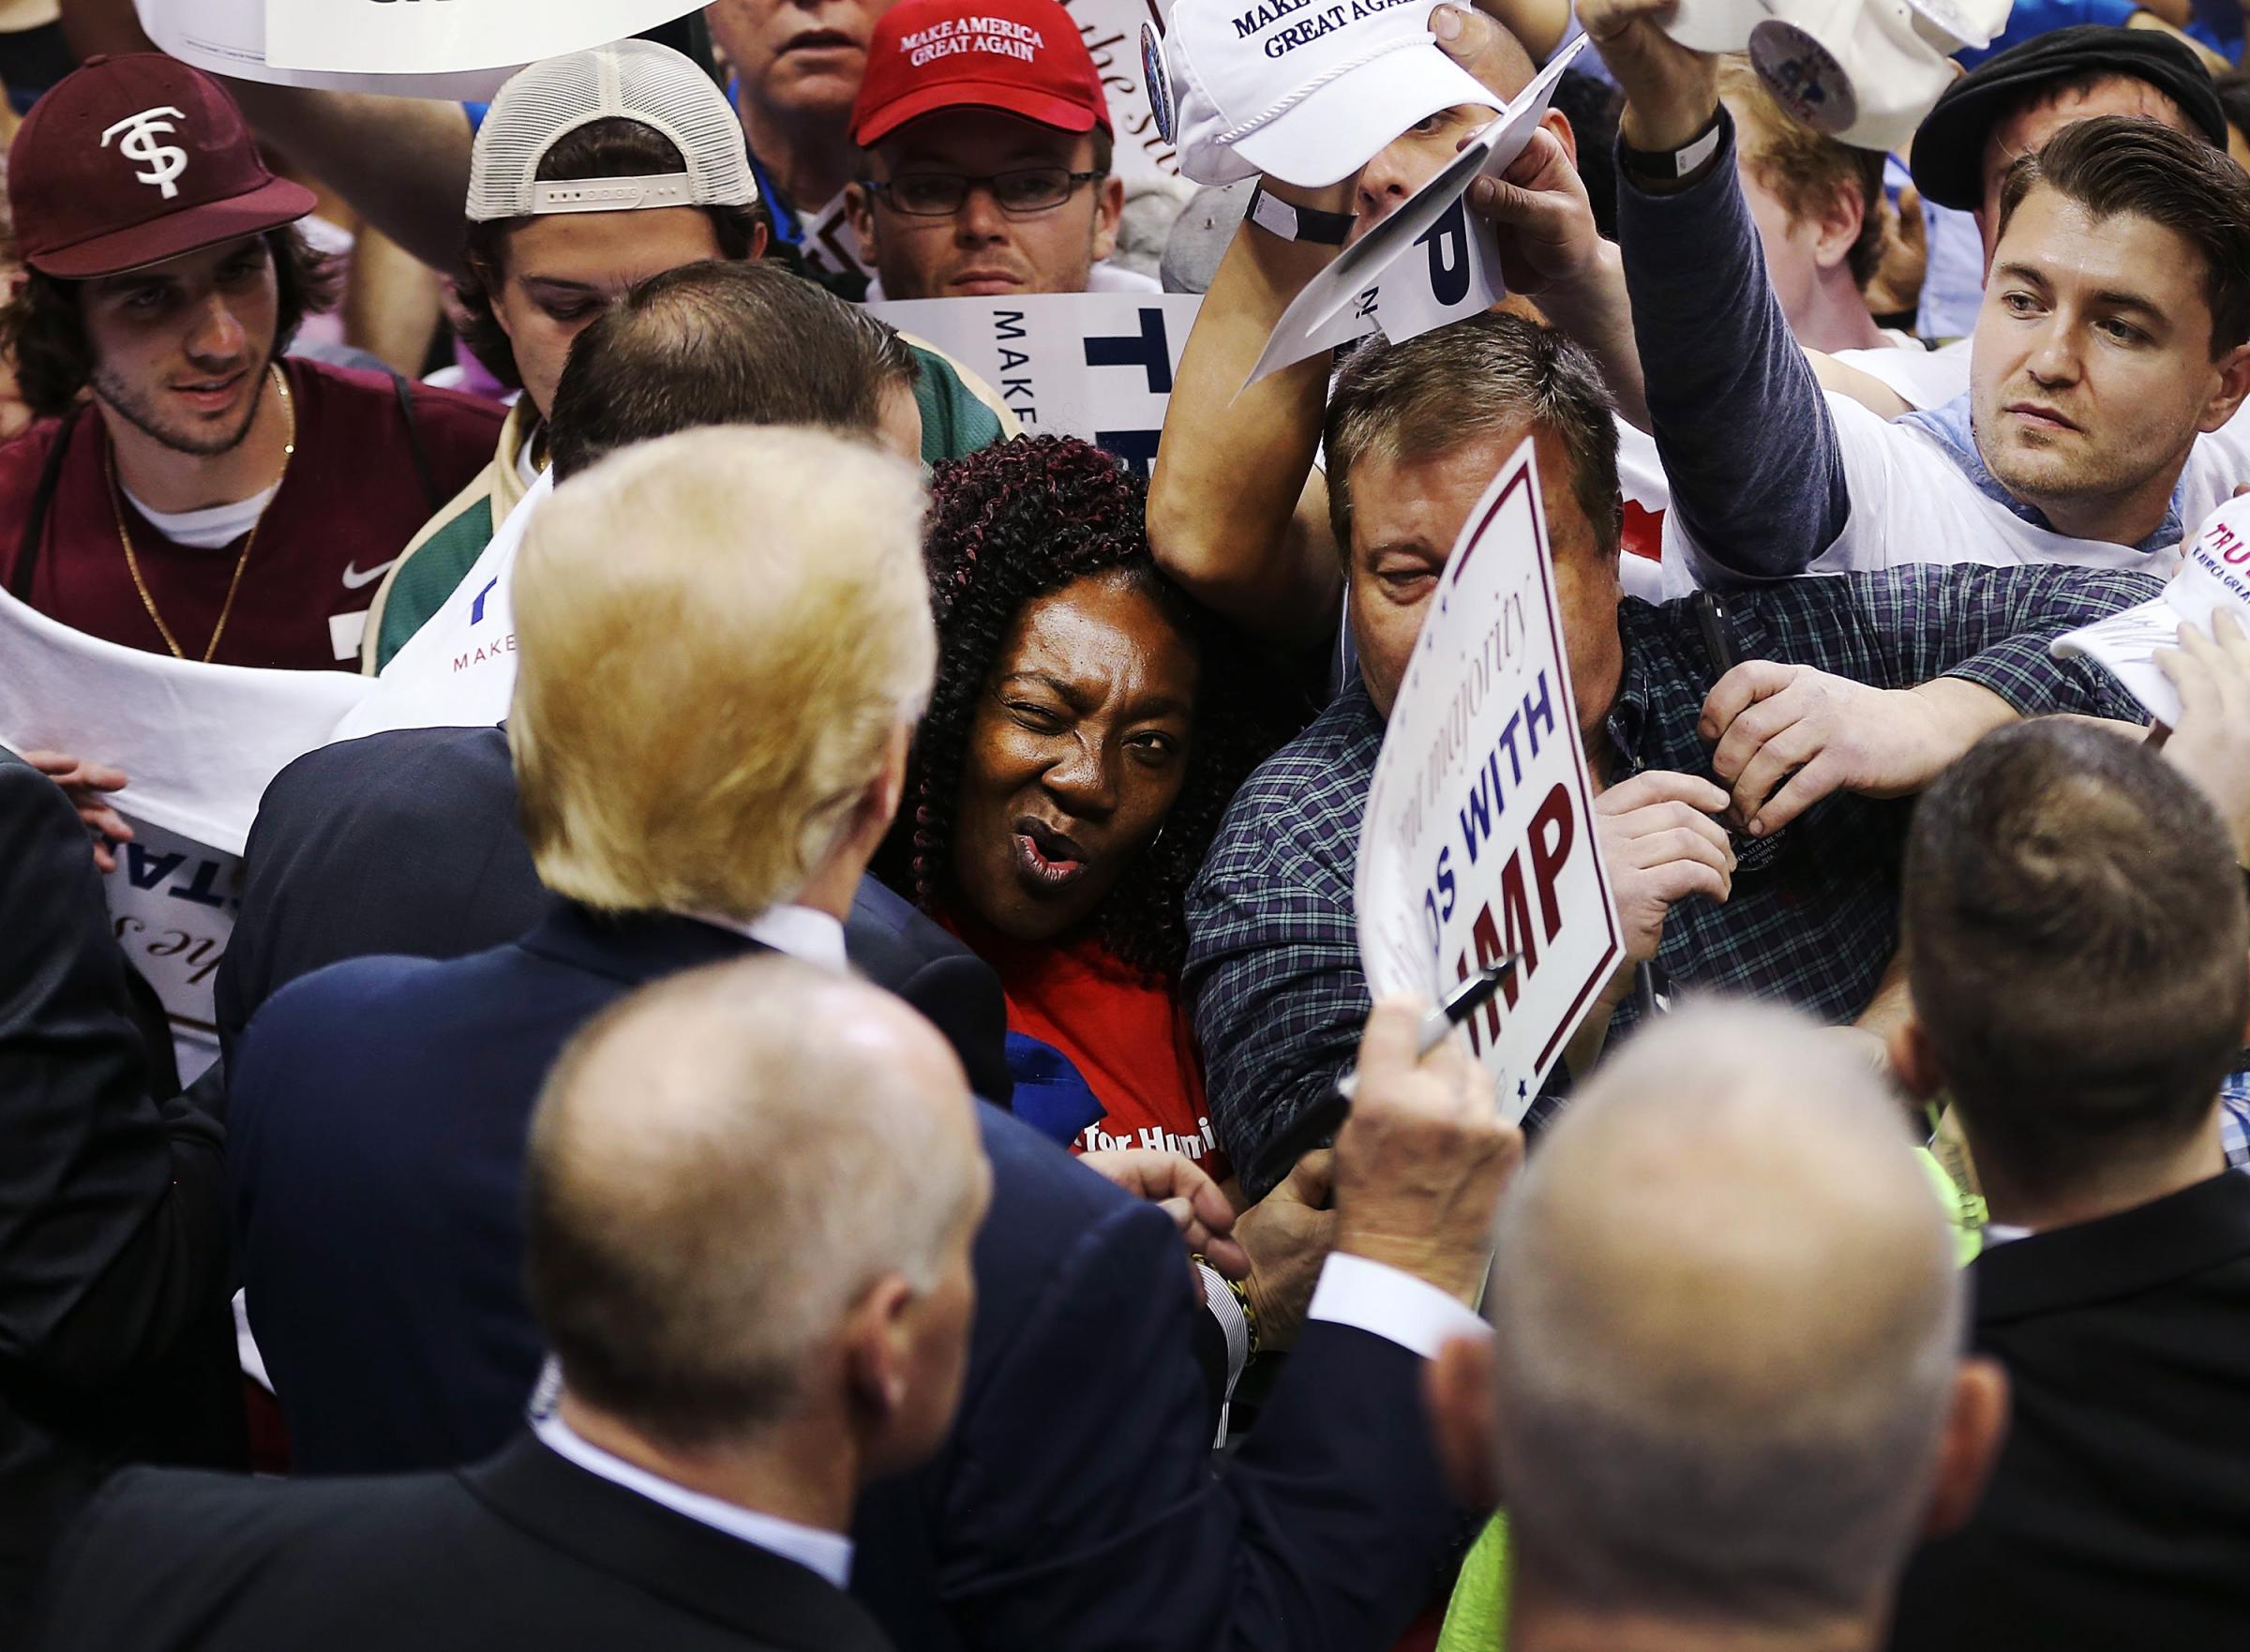 Republican presidential candidate Donald Trump greets people during a campaign rally at the University of South Florida Sun Dome on Feb. 12, 2016 in Tampa, Fla.